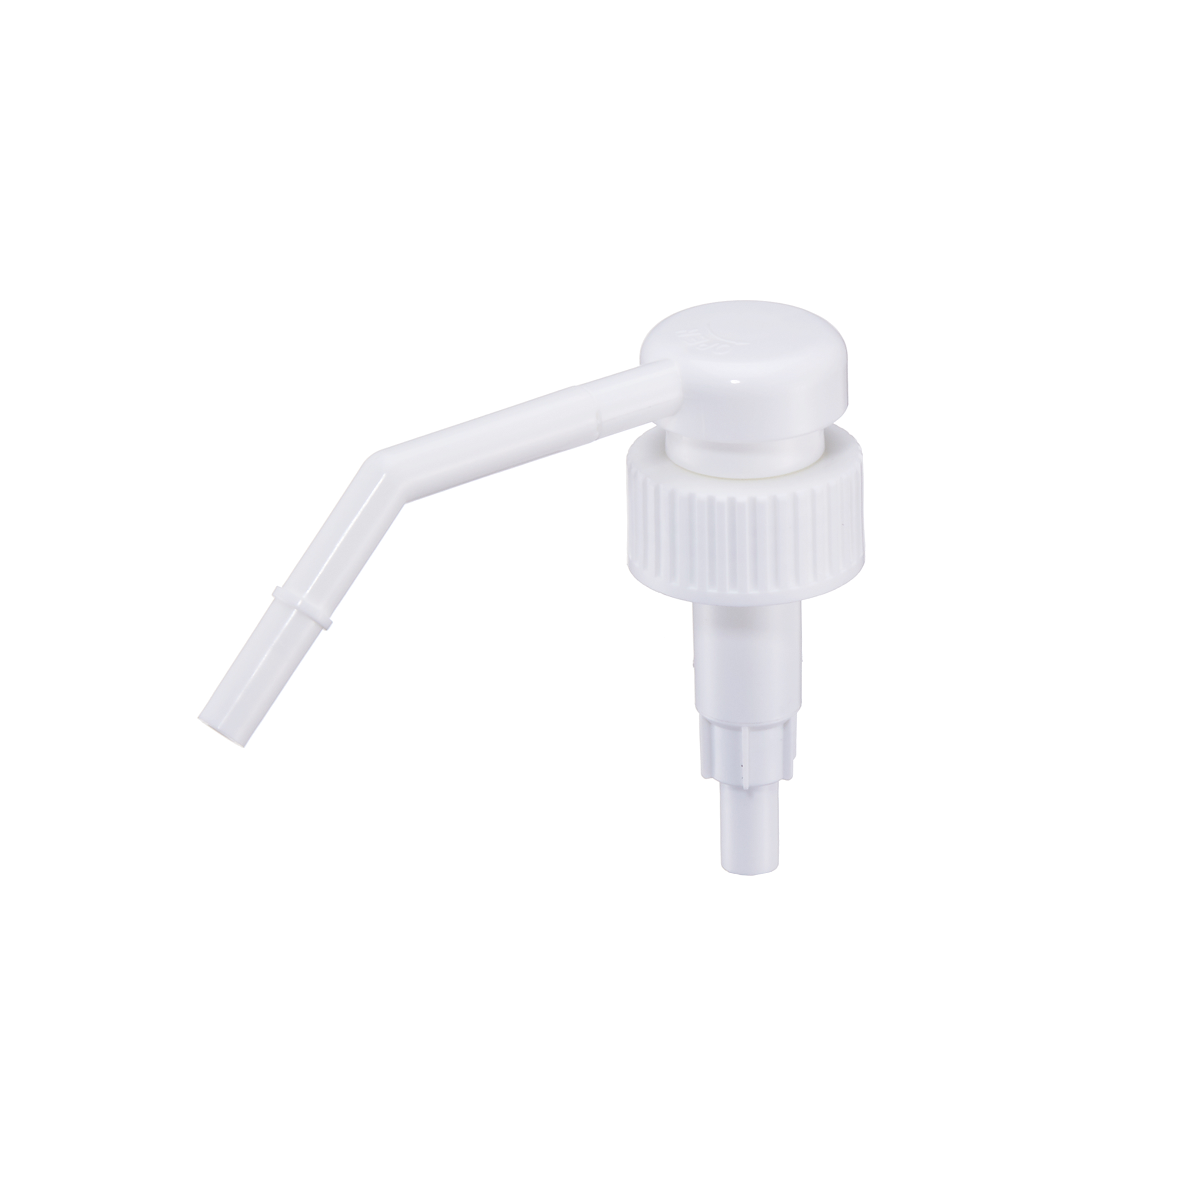 Isopropyl Alcohol Pump Suppliers